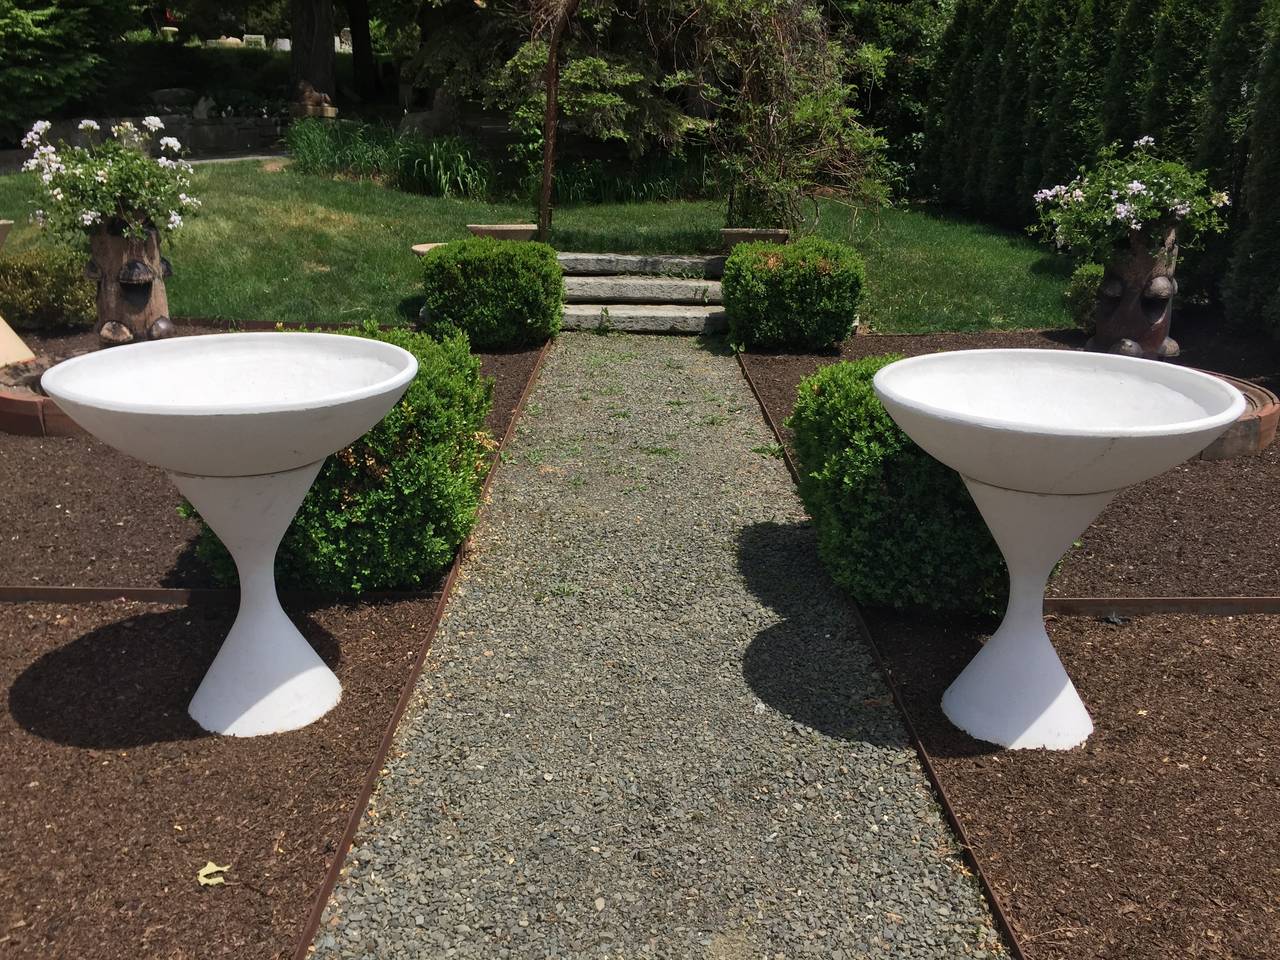 We were really excited to find these, even though they are in newish white paint. The bases are classical Willy Guhl 'Diabolo" hourglass-shaped planters
topped with removable bowls. As such, they can be configured as shown or turned into four